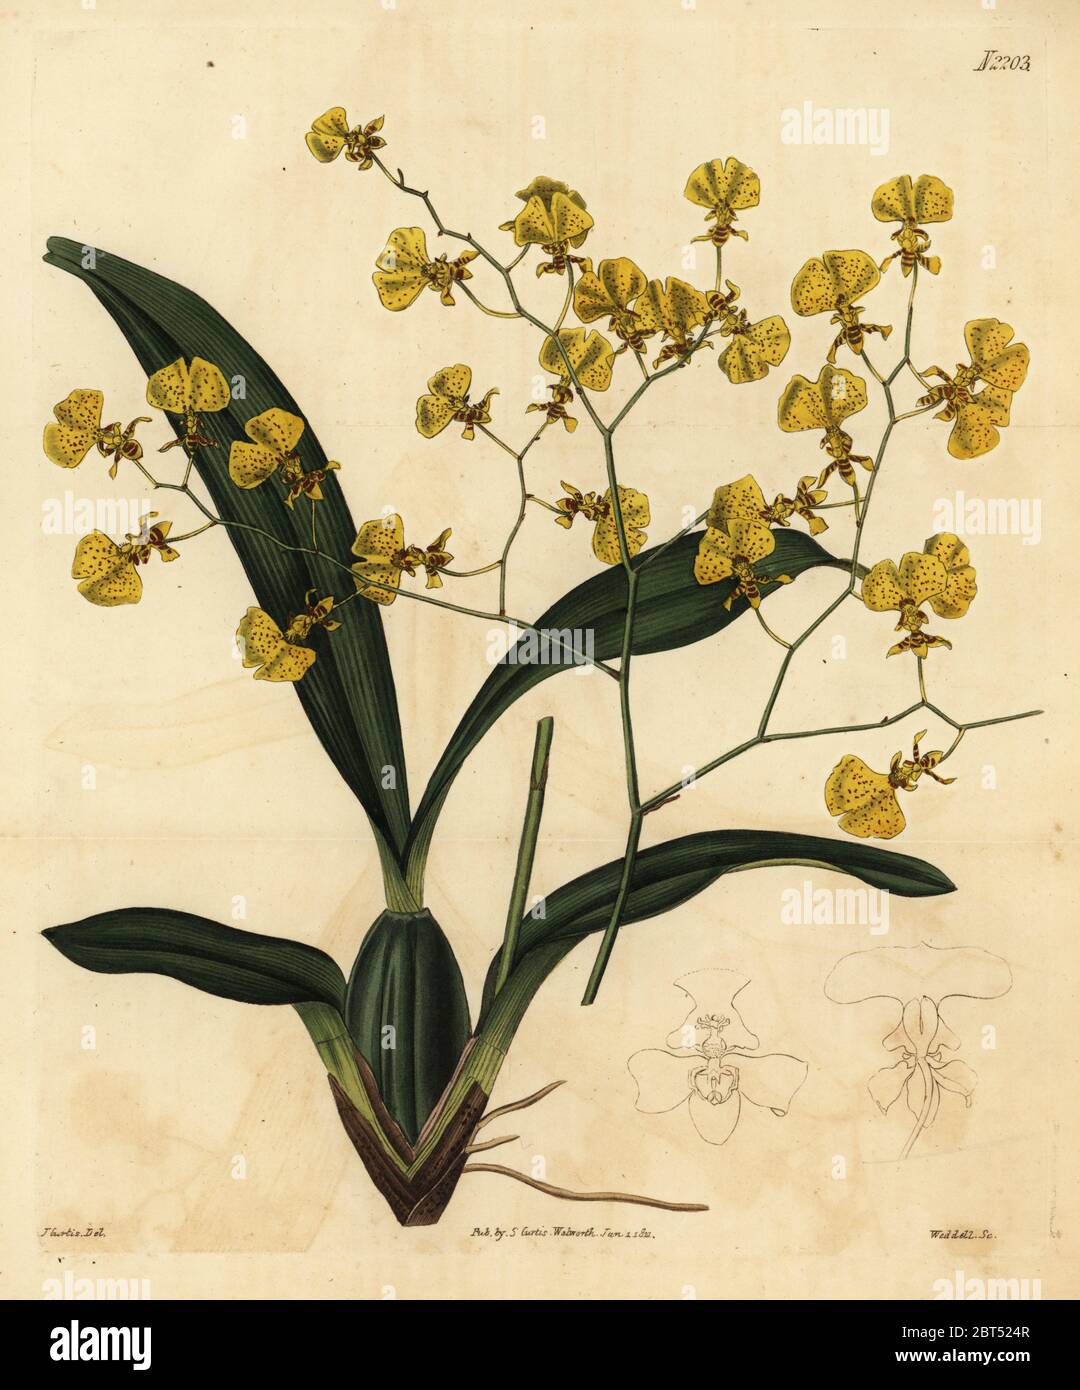 Gomesa orchid, Gomesa flexuosa (Oncidium flexuosus). Handcoloured copperplate engraving by Weddell after an illustration by John Curtis from Samuel Curtis' Botanical Magazine, London, 1821. Stock Photo